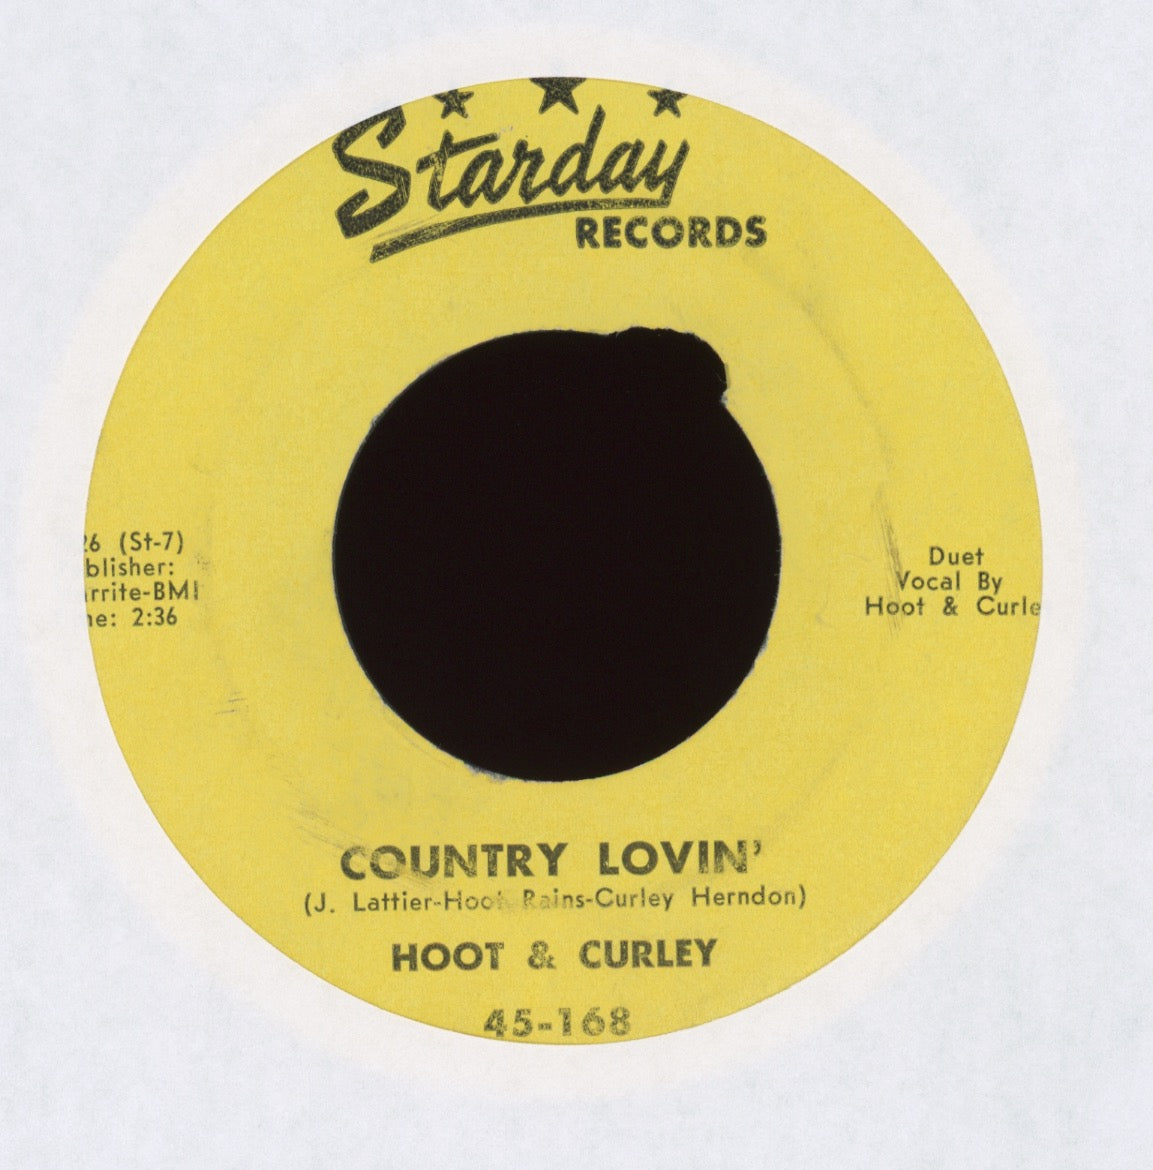 Hoot & Curley - Country Lovin' on Starday